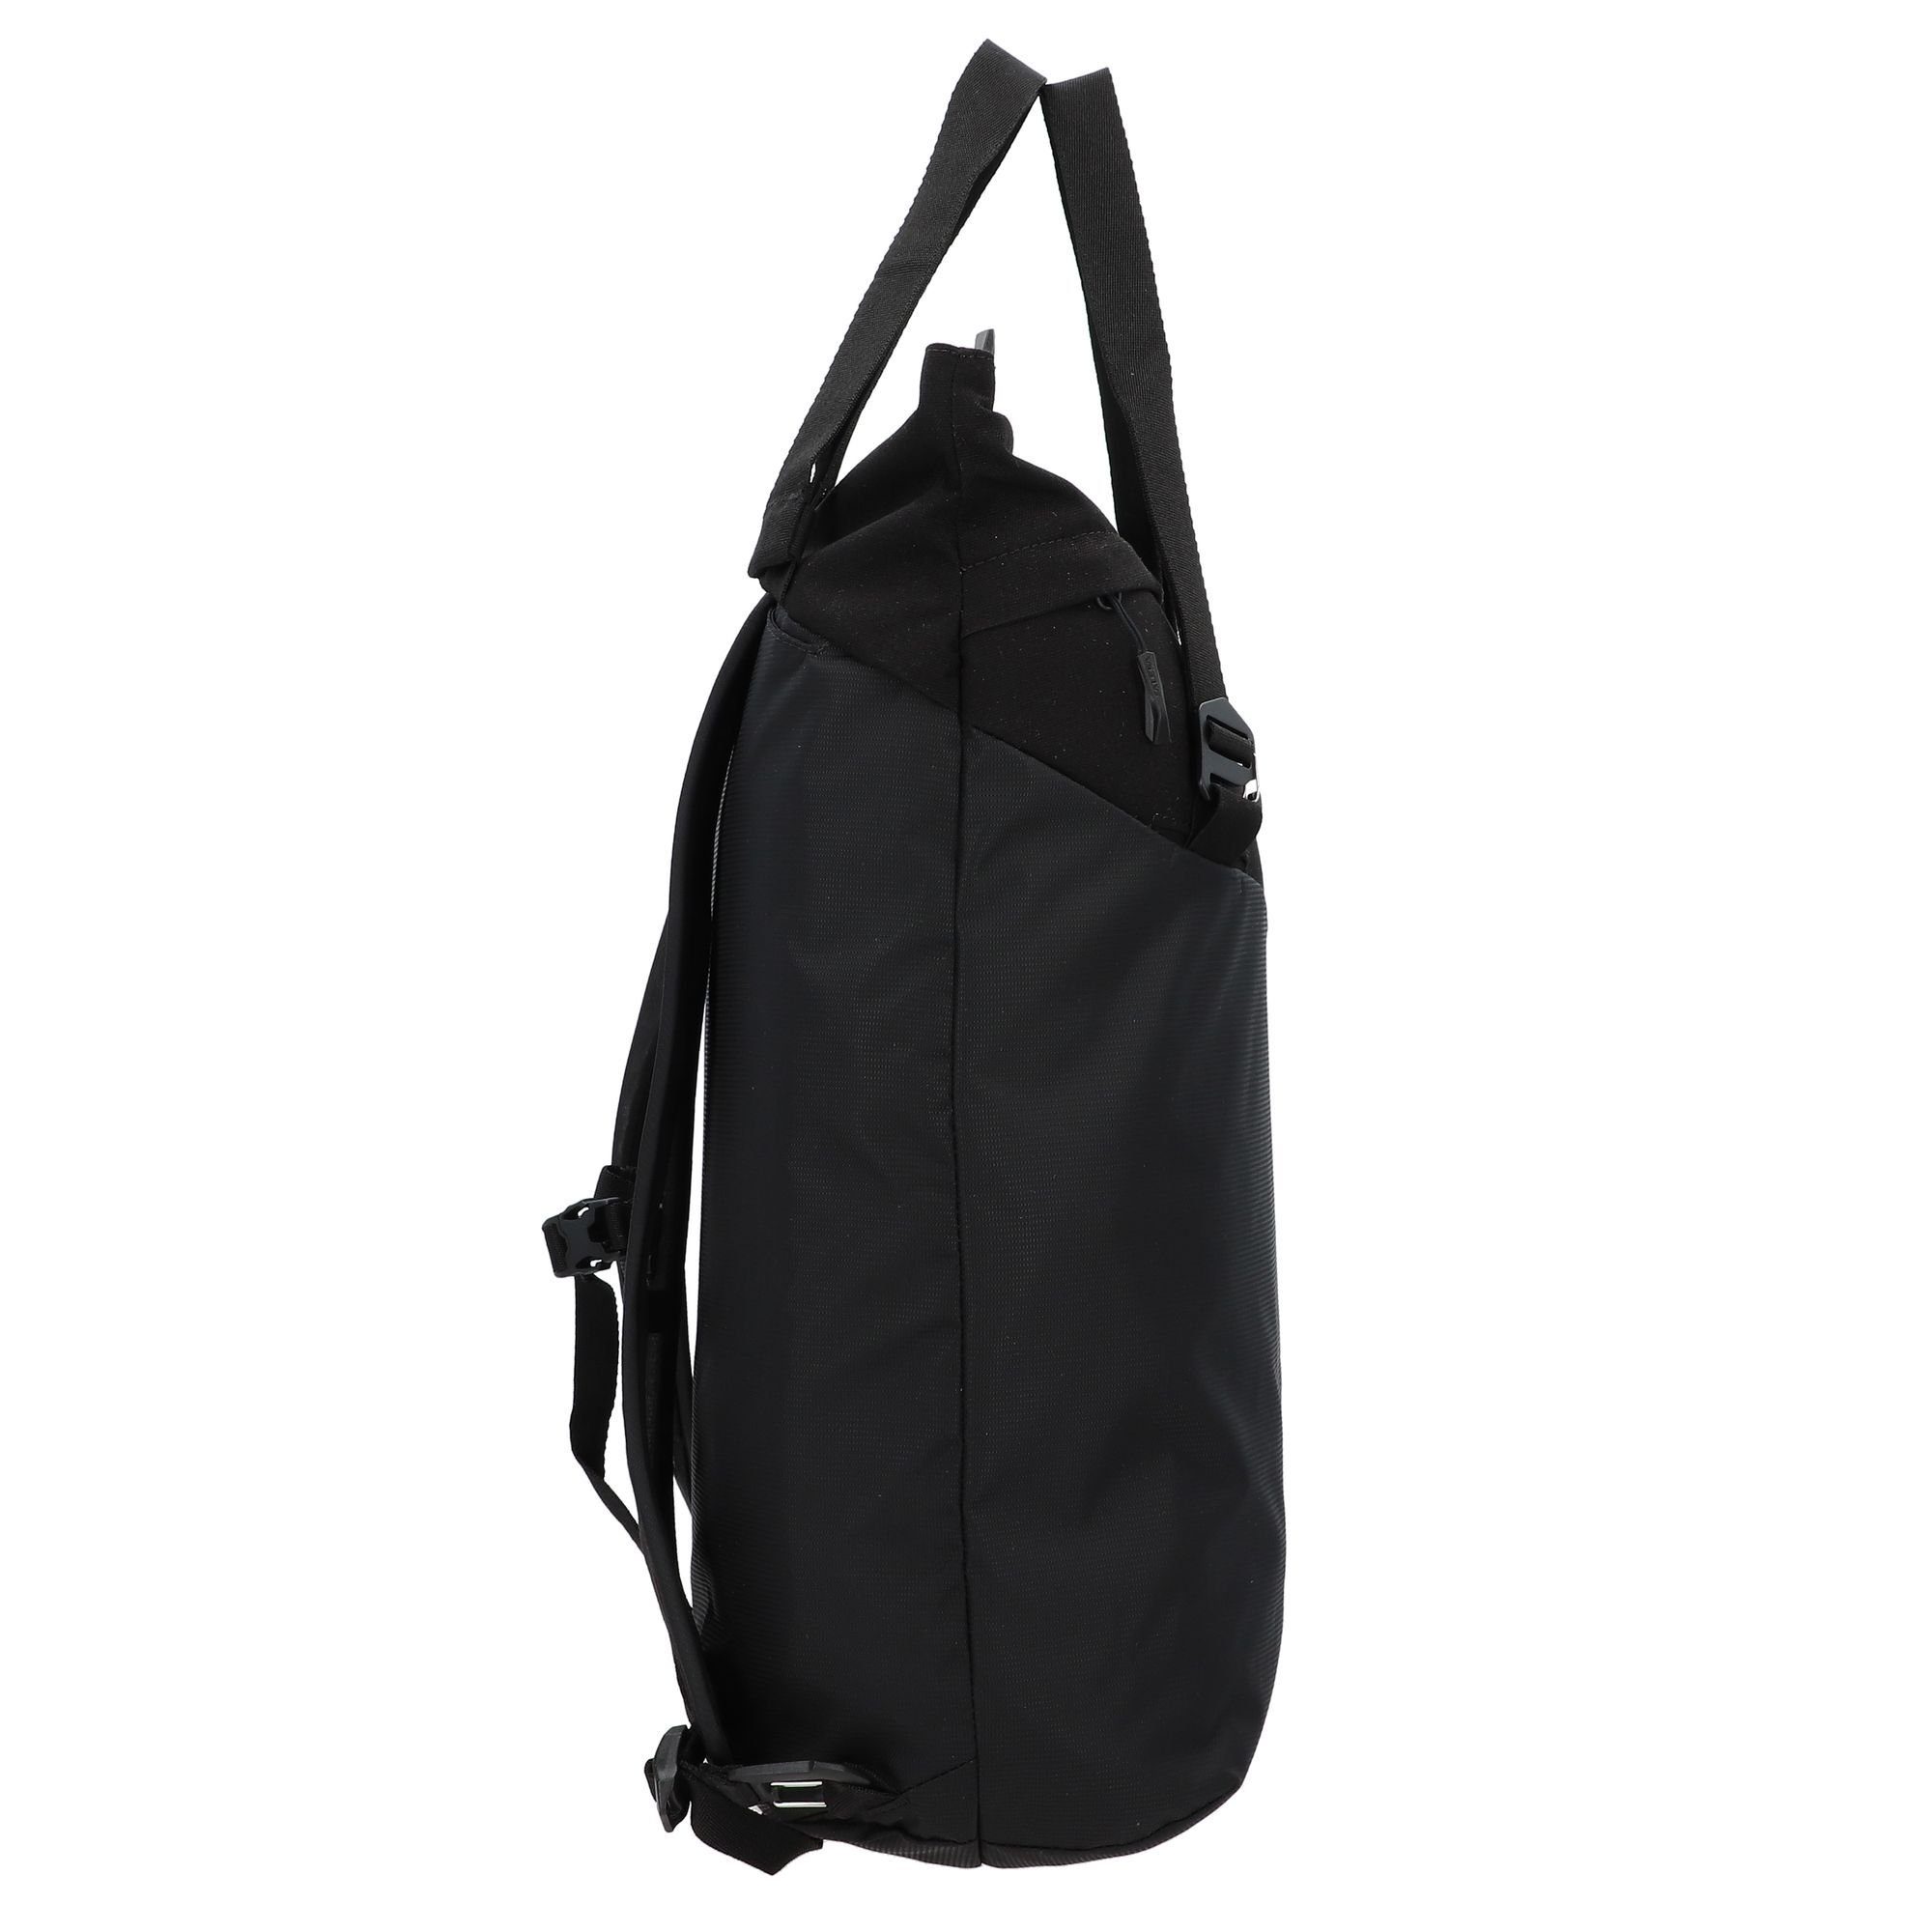 Salewa Fanes, Polyester Schultertasche out black